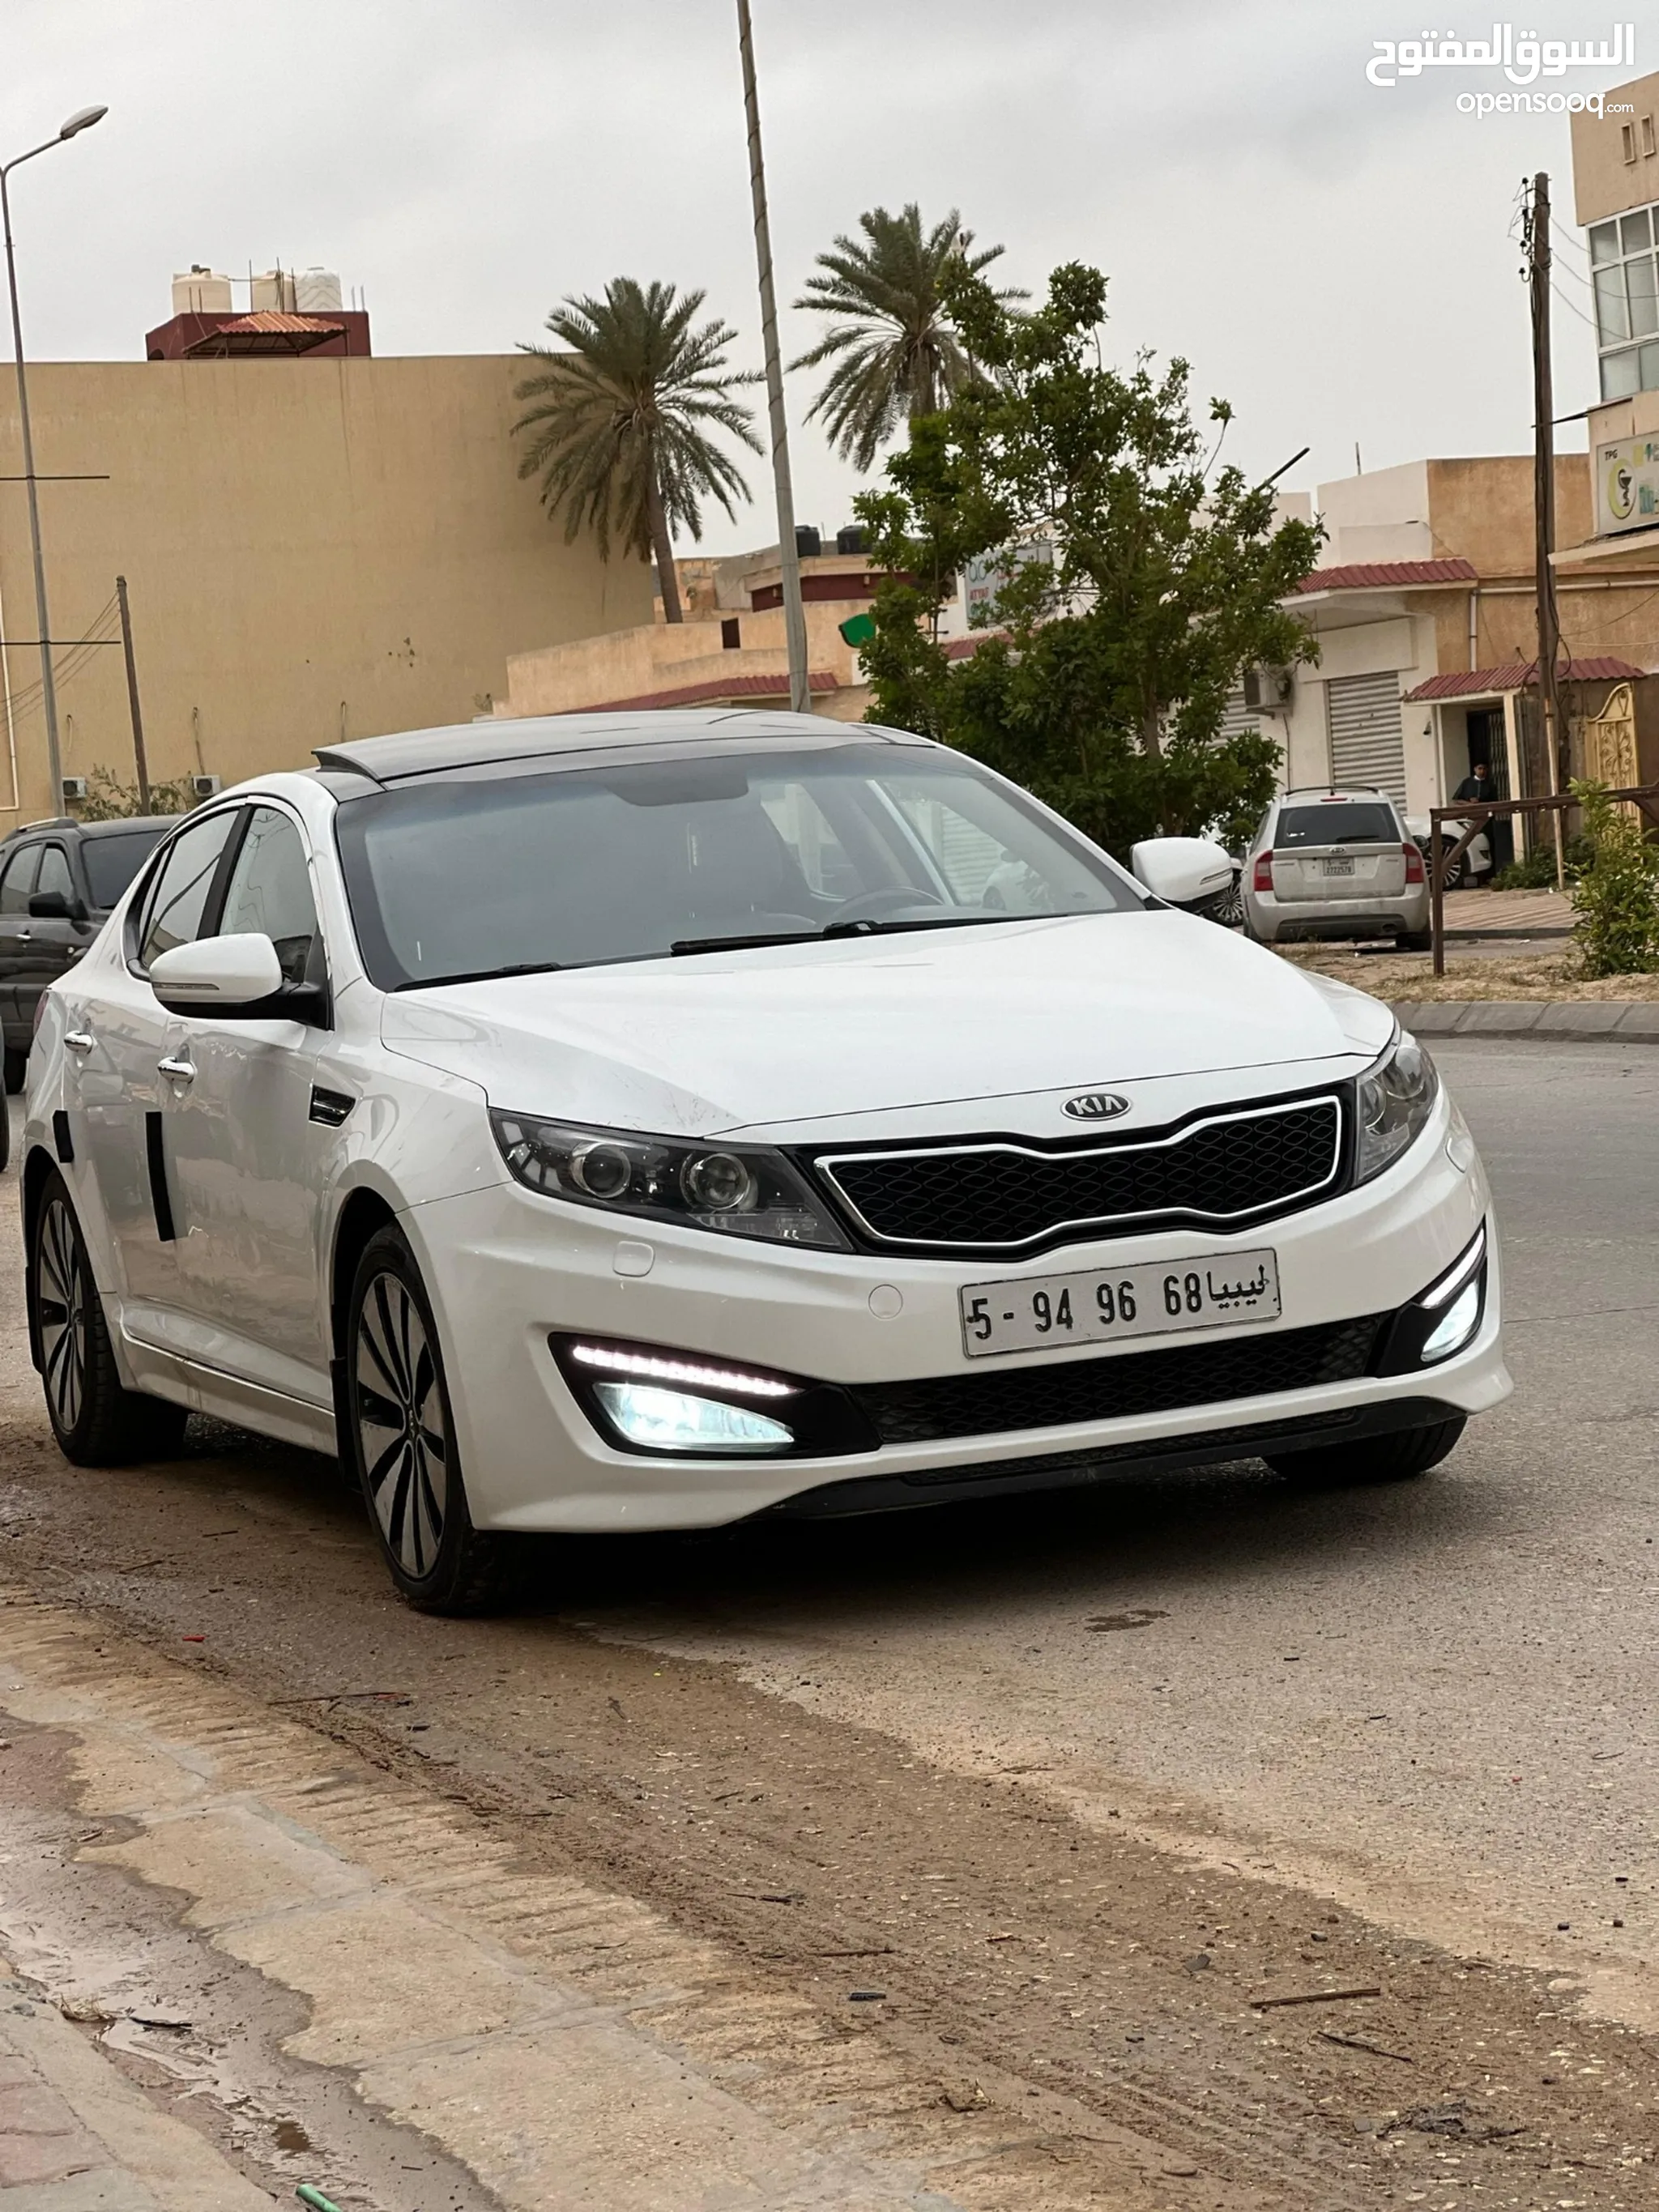 Cars for Sale in Libya : Best Prices : Used Cars : Second Hand Cars |  OpenSooq